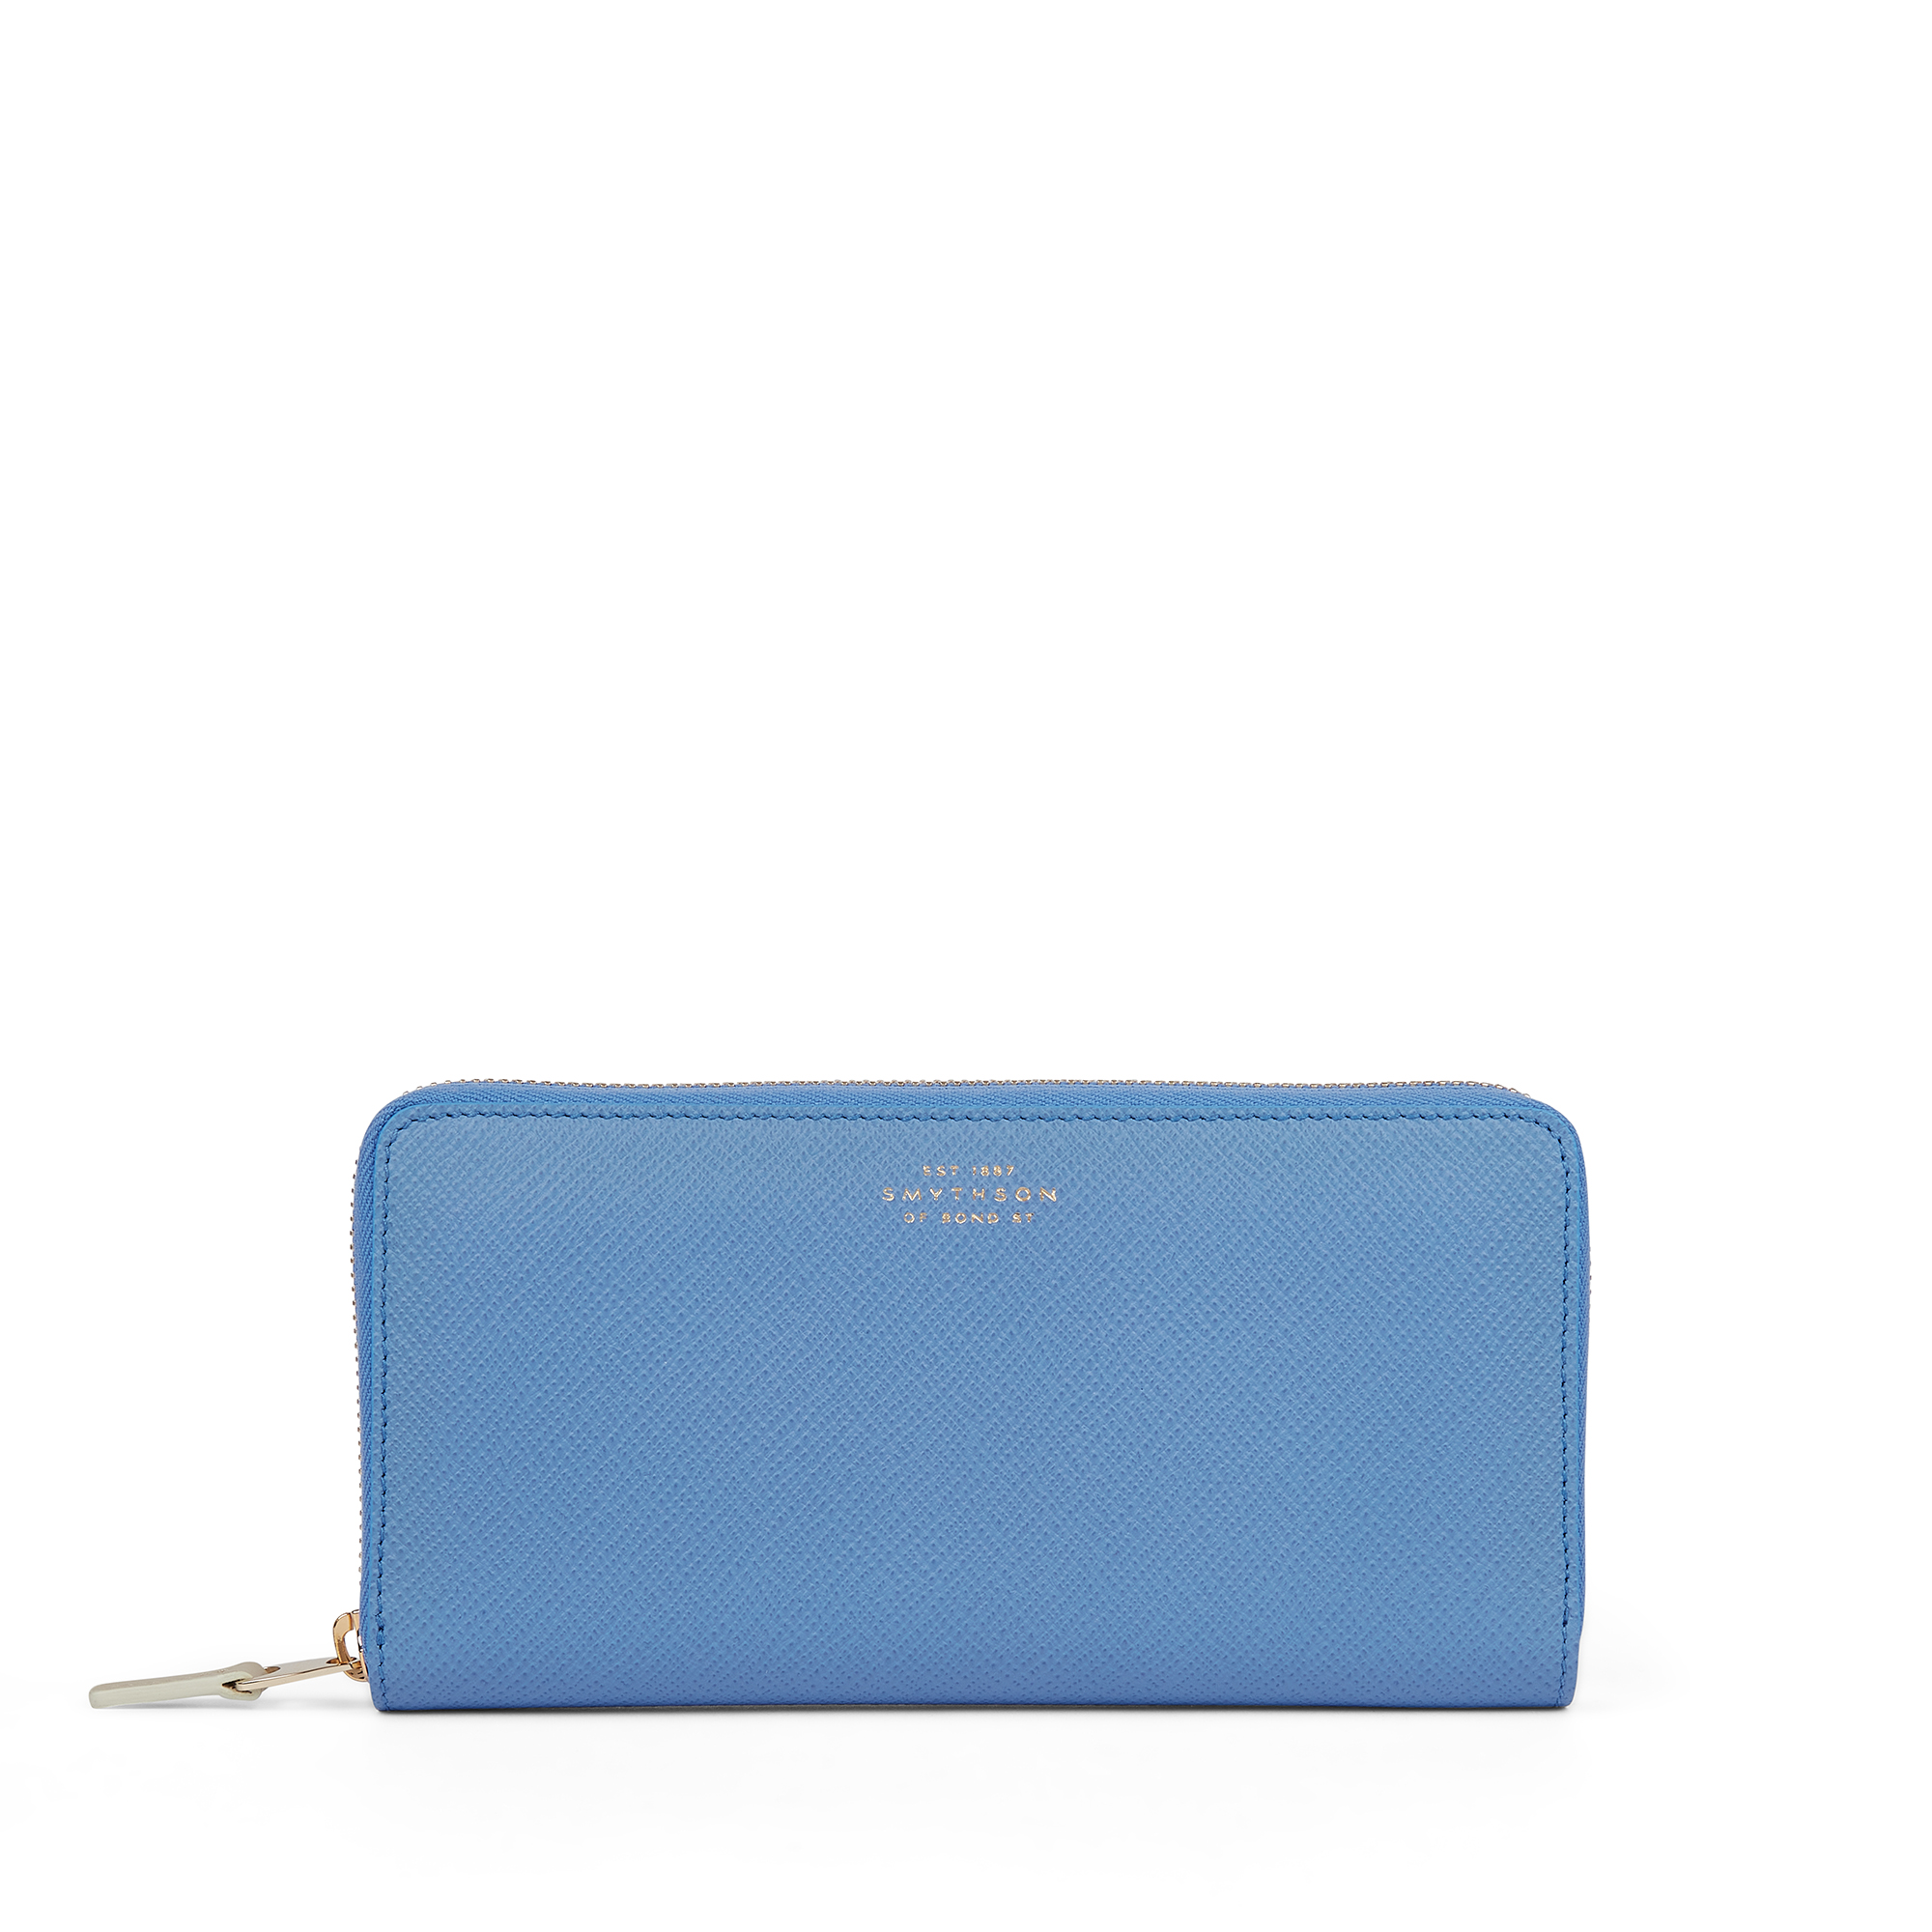 Large Zip Around Purse in Panama in nile blue | Smythson